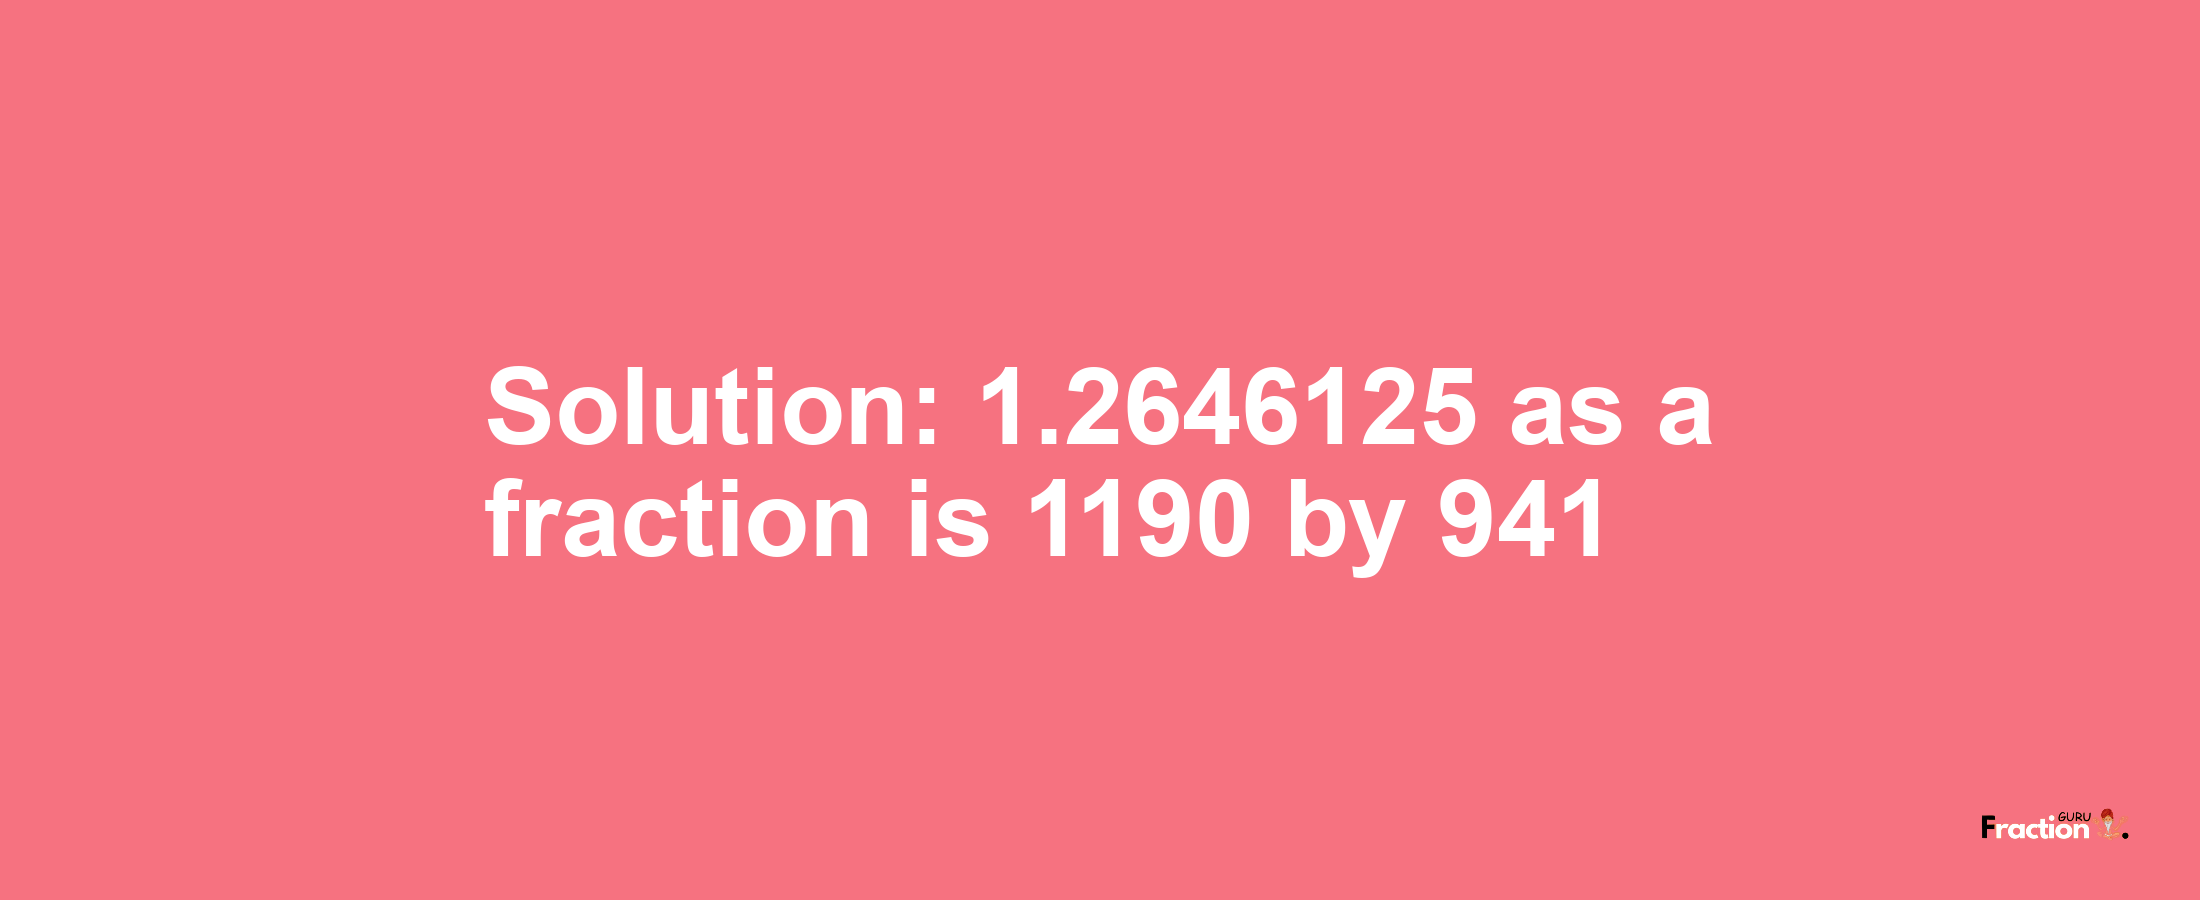 Solution:1.2646125 as a fraction is 1190/941